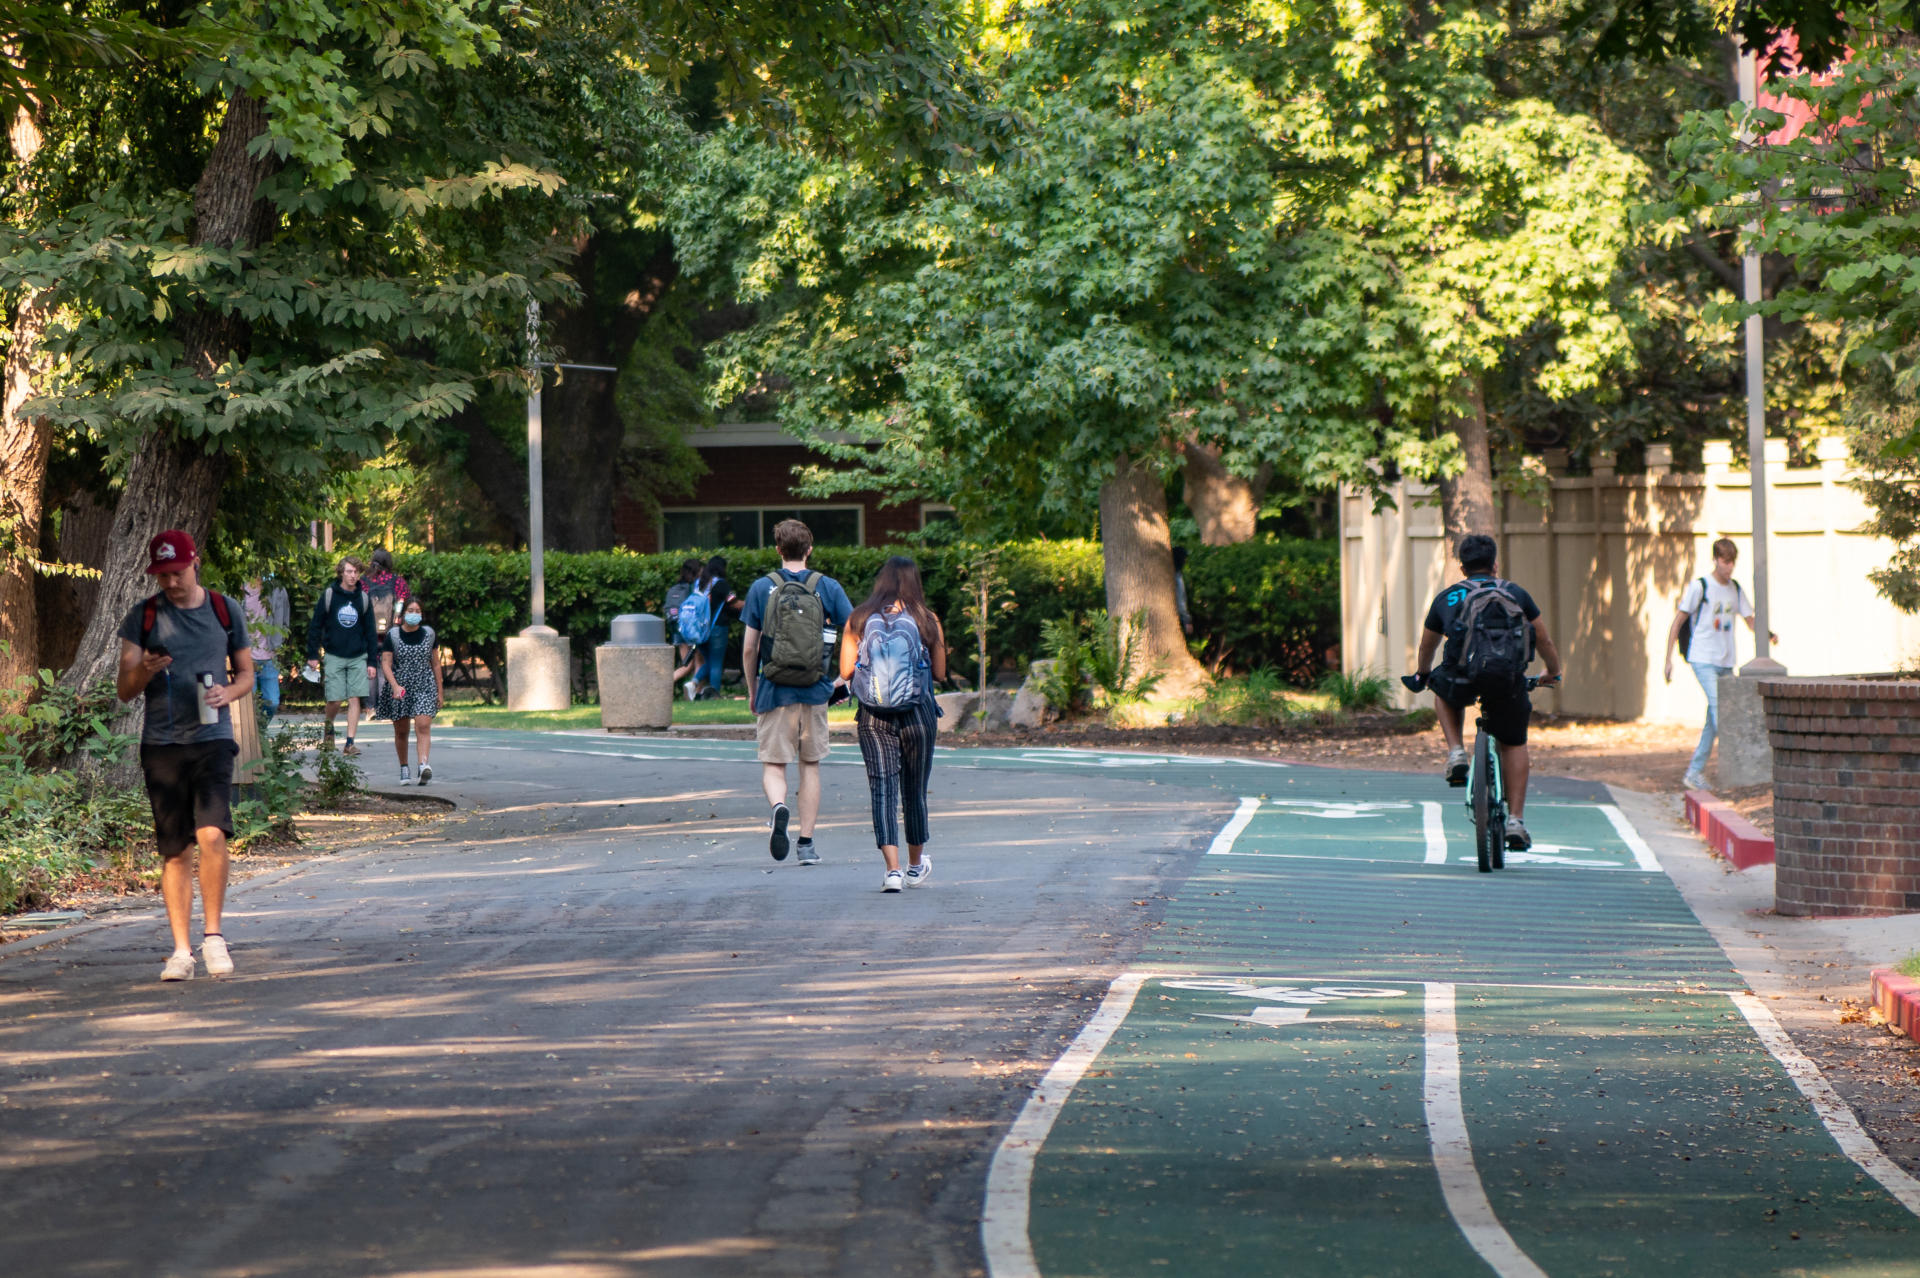 Students walk and ride bicycles on a college campus.